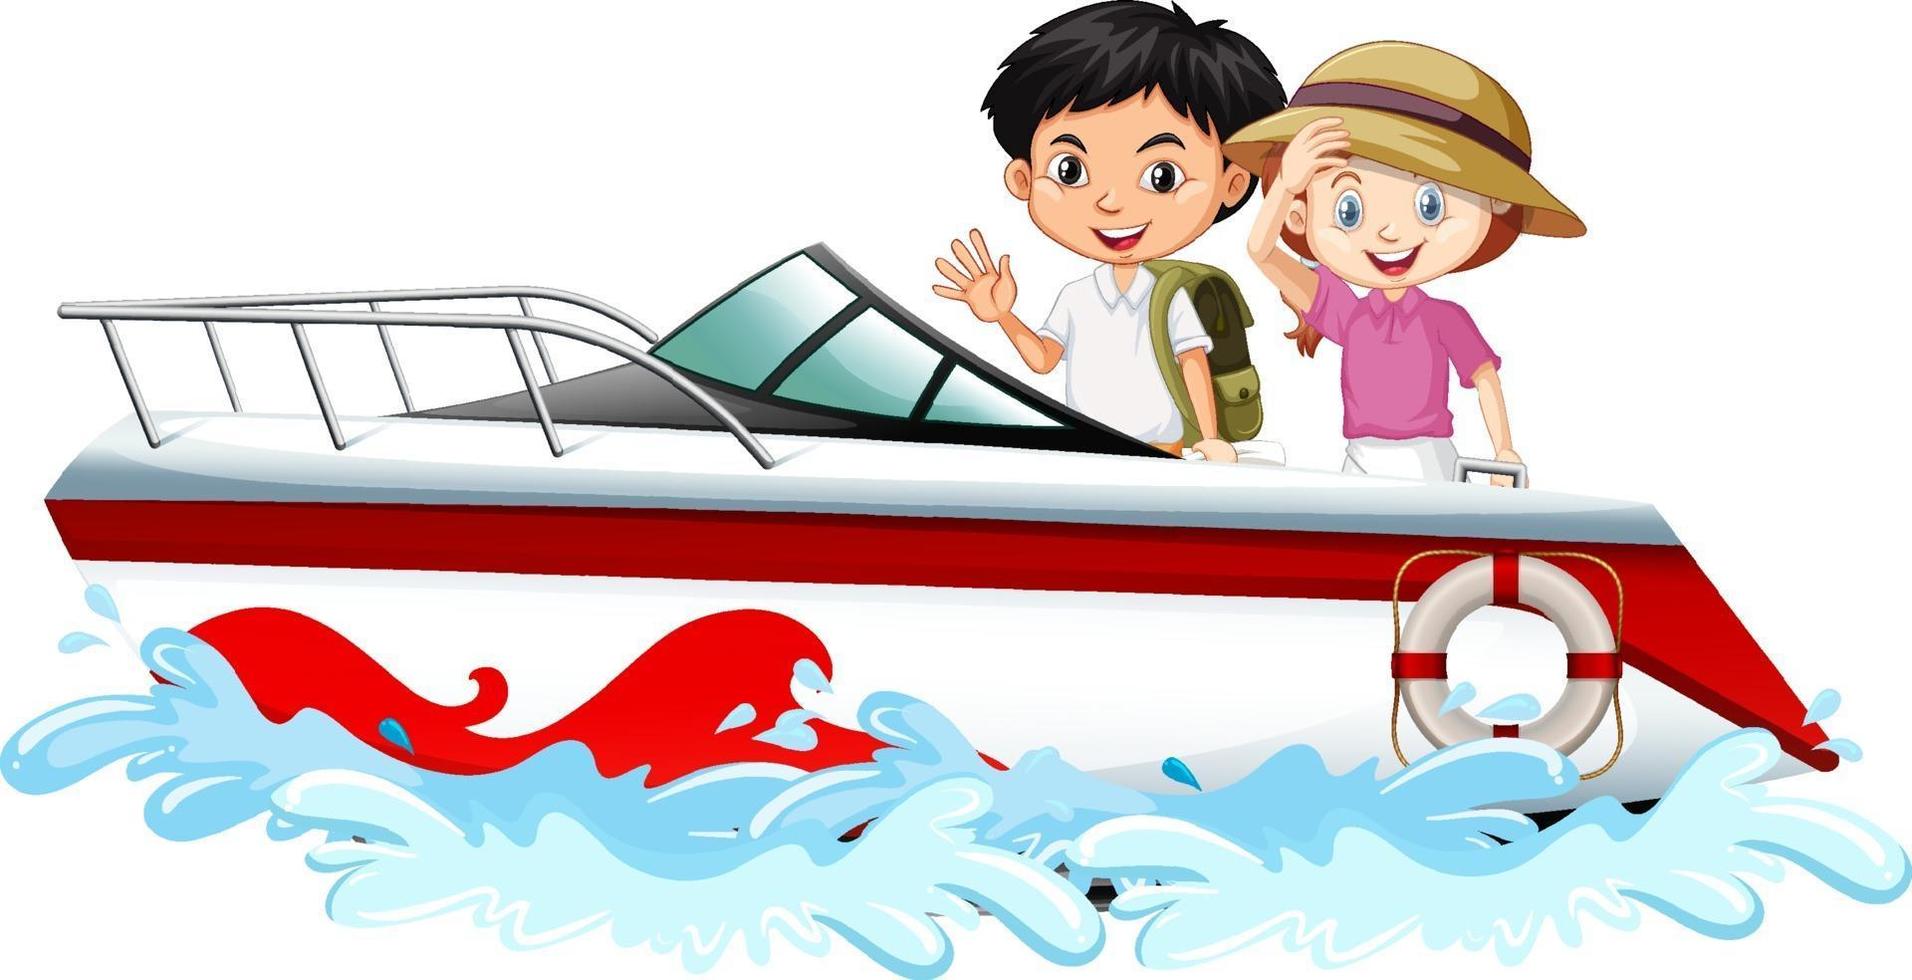 Children standing on a speed boat on white background vector